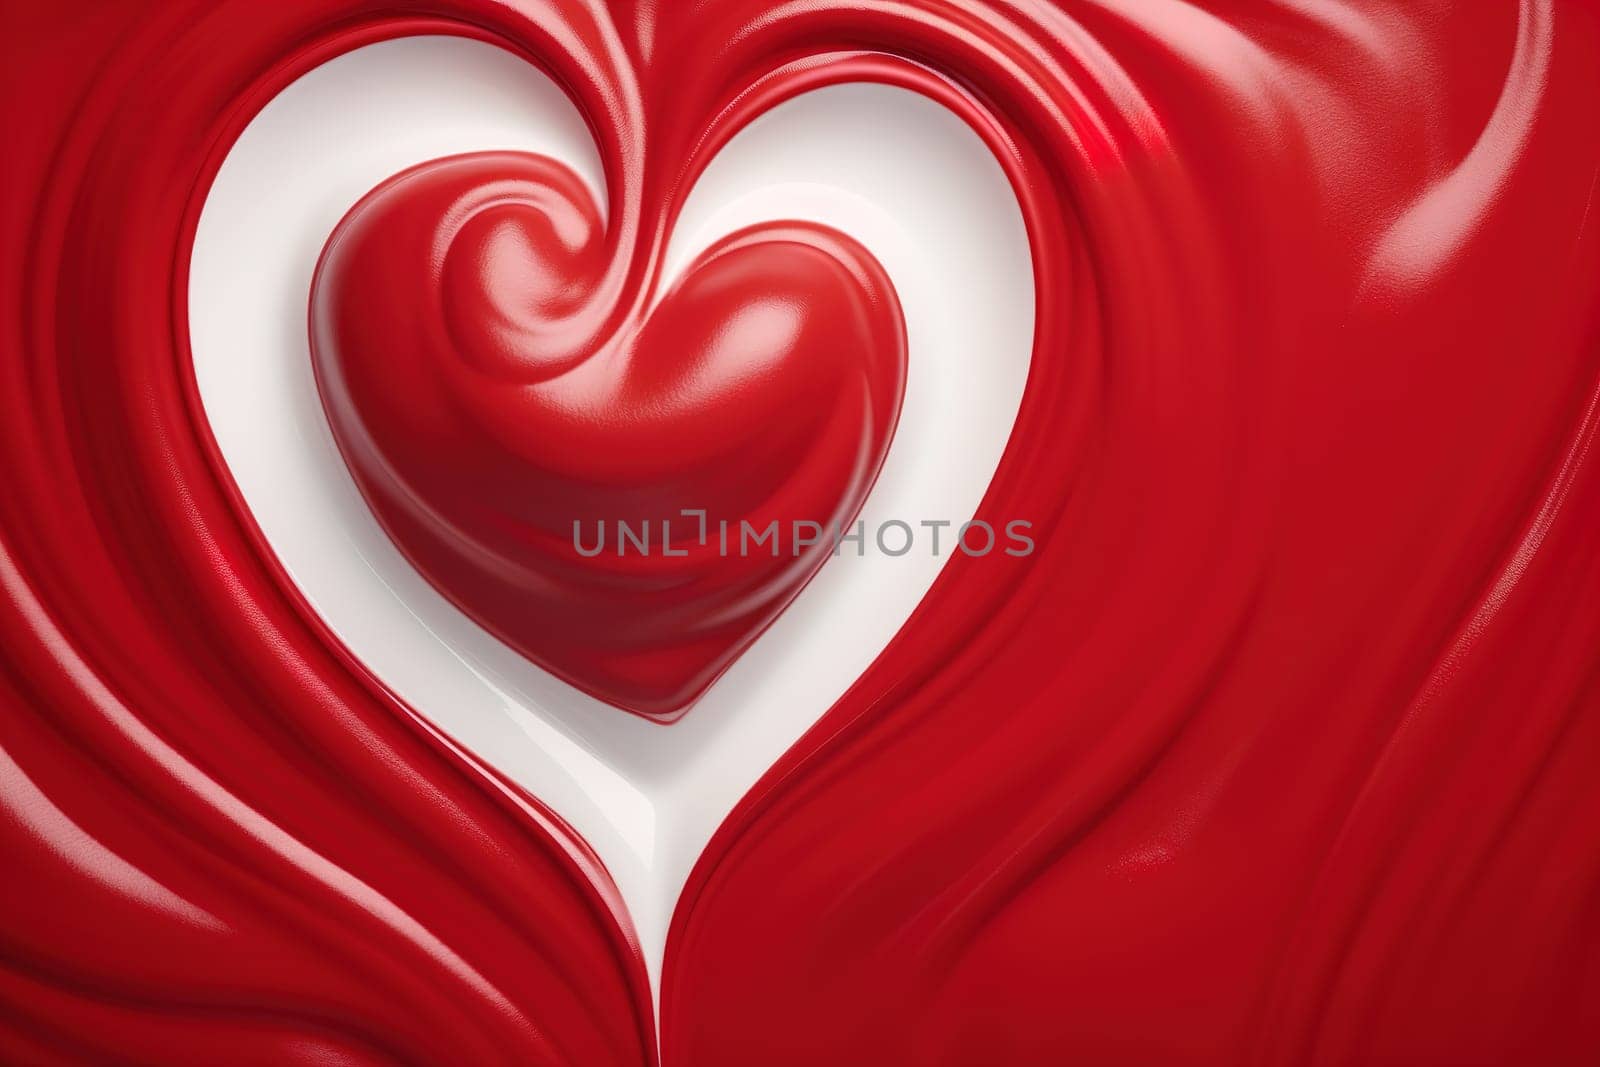 A sumptuous red and white cream swirl forming a heart, perfect for Valentine's Day, romantic concepts, or luxury beauty product visuals with a captivating, love-inspired design. Generative AI